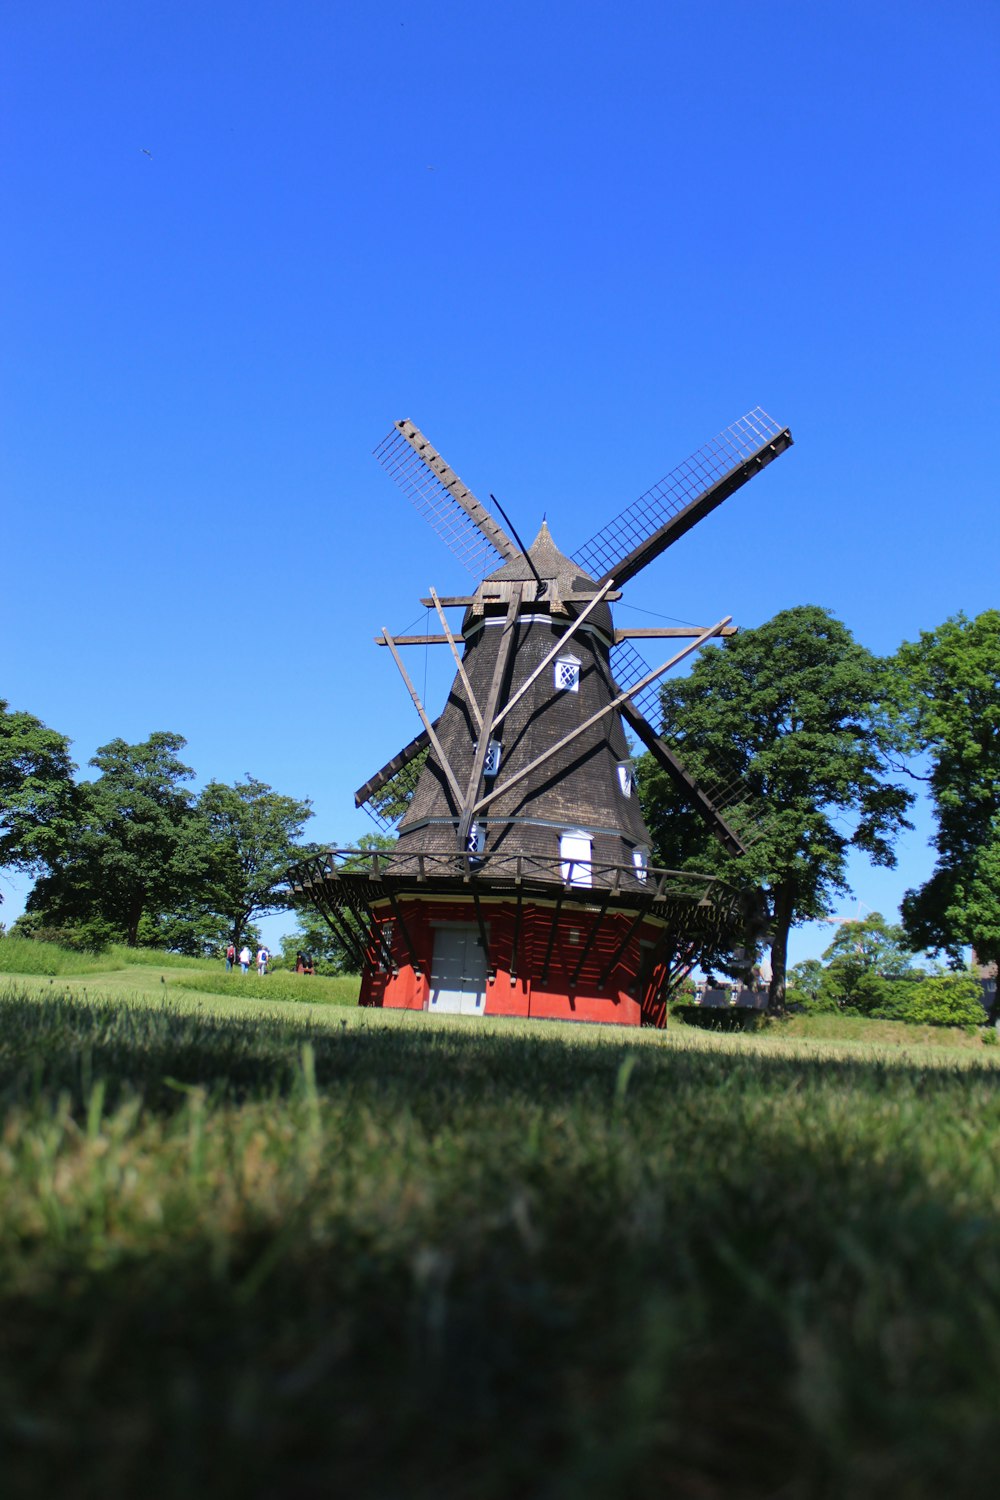 brown and red windmill on green grass field under blue sky during daytime